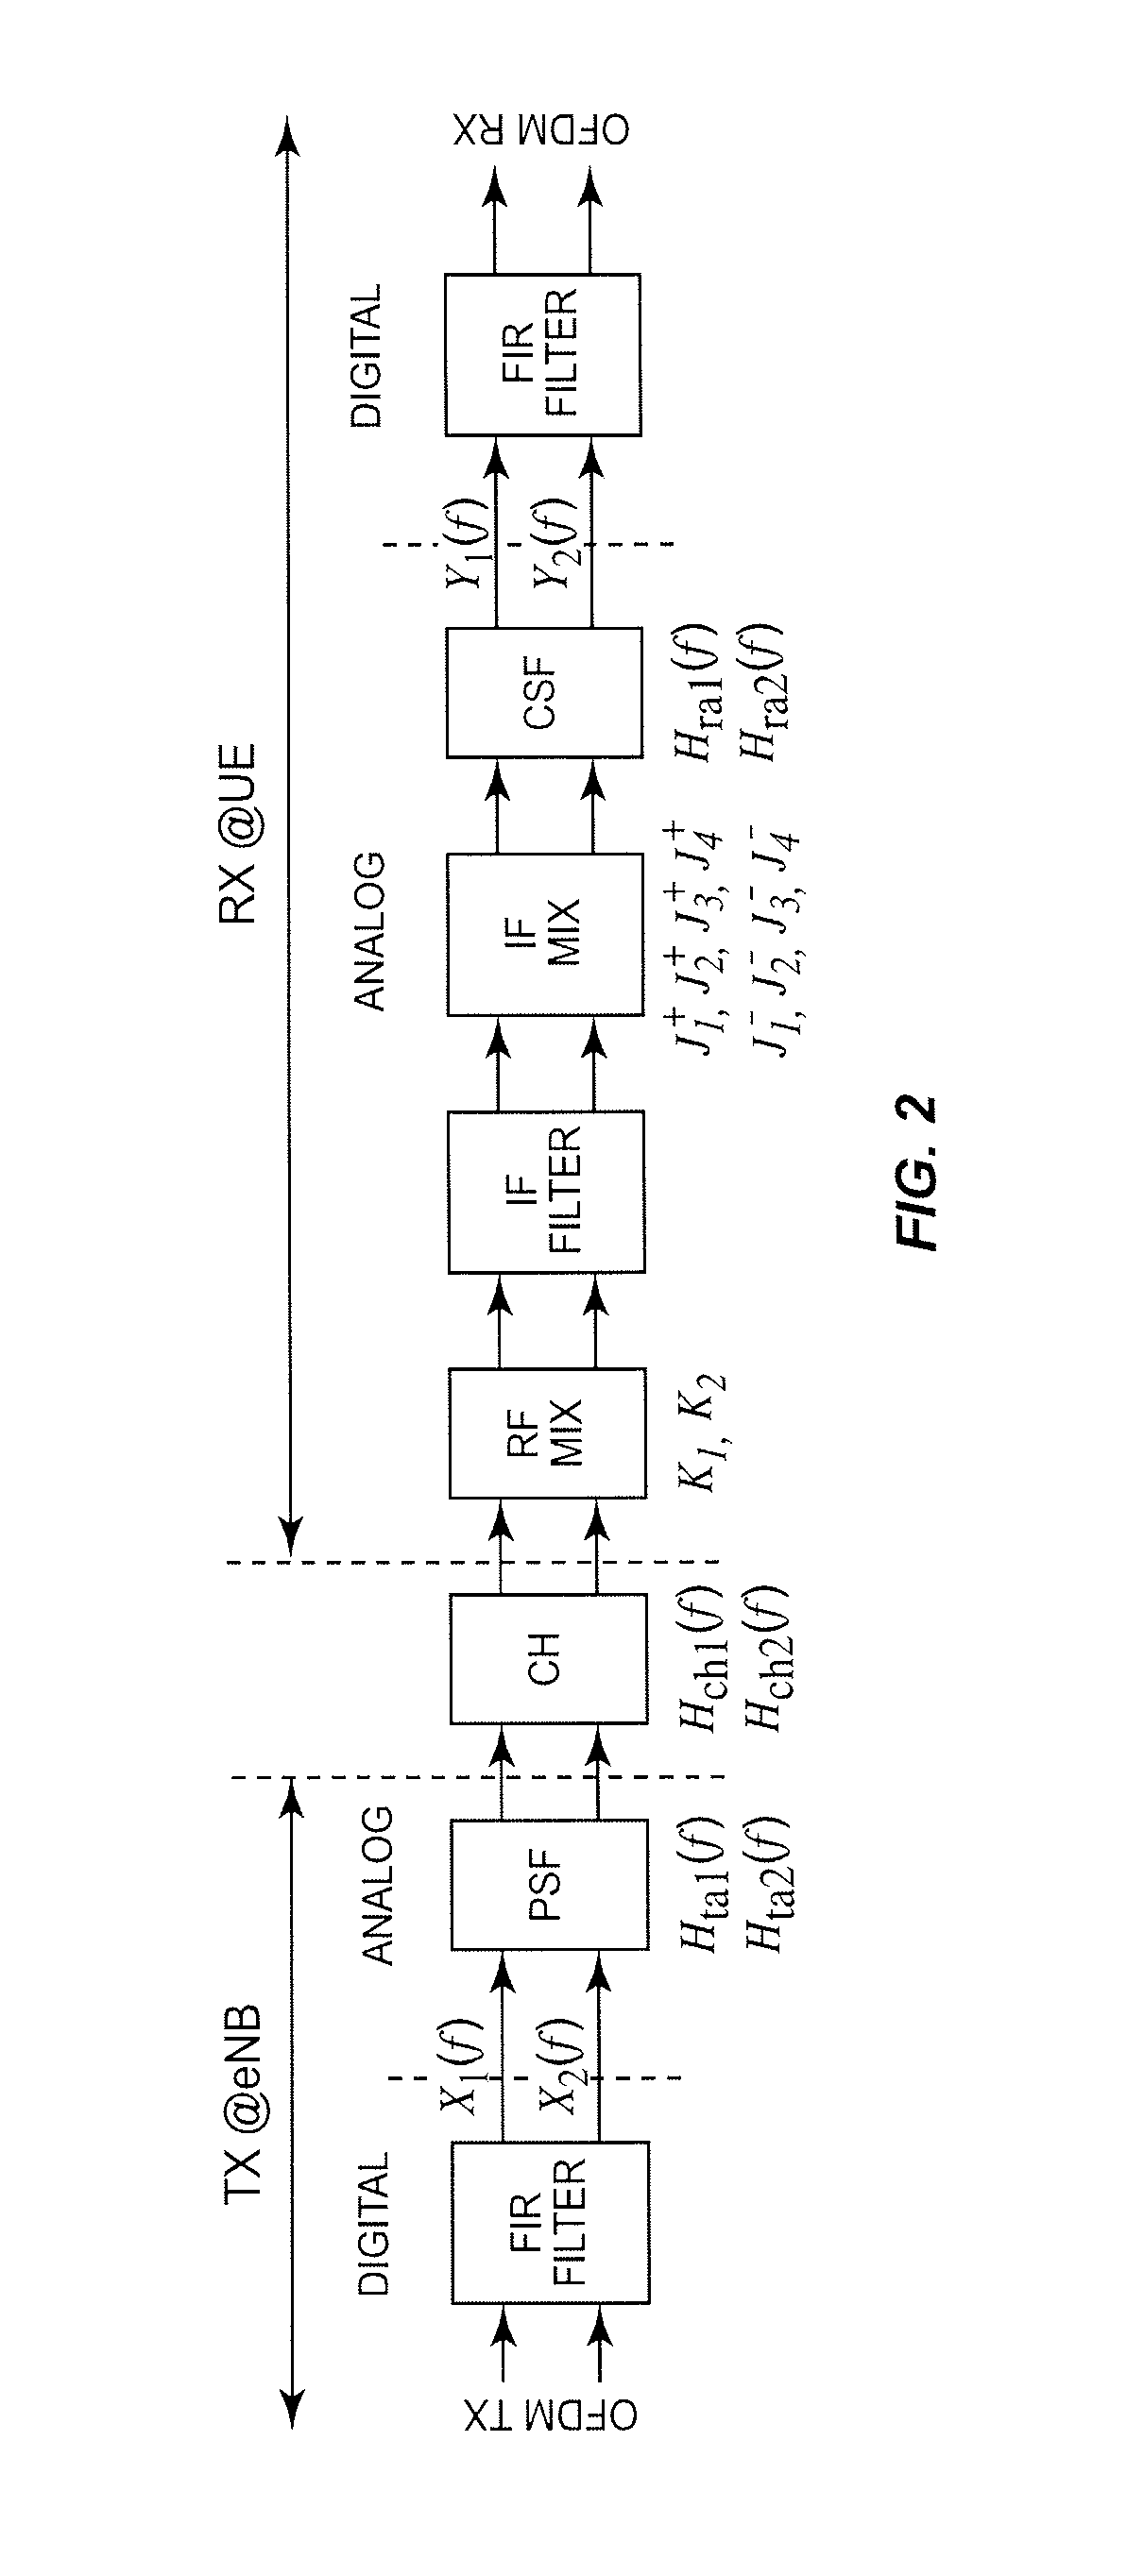 Inter-carrier bandwidth control for mitigating IQ imbalance